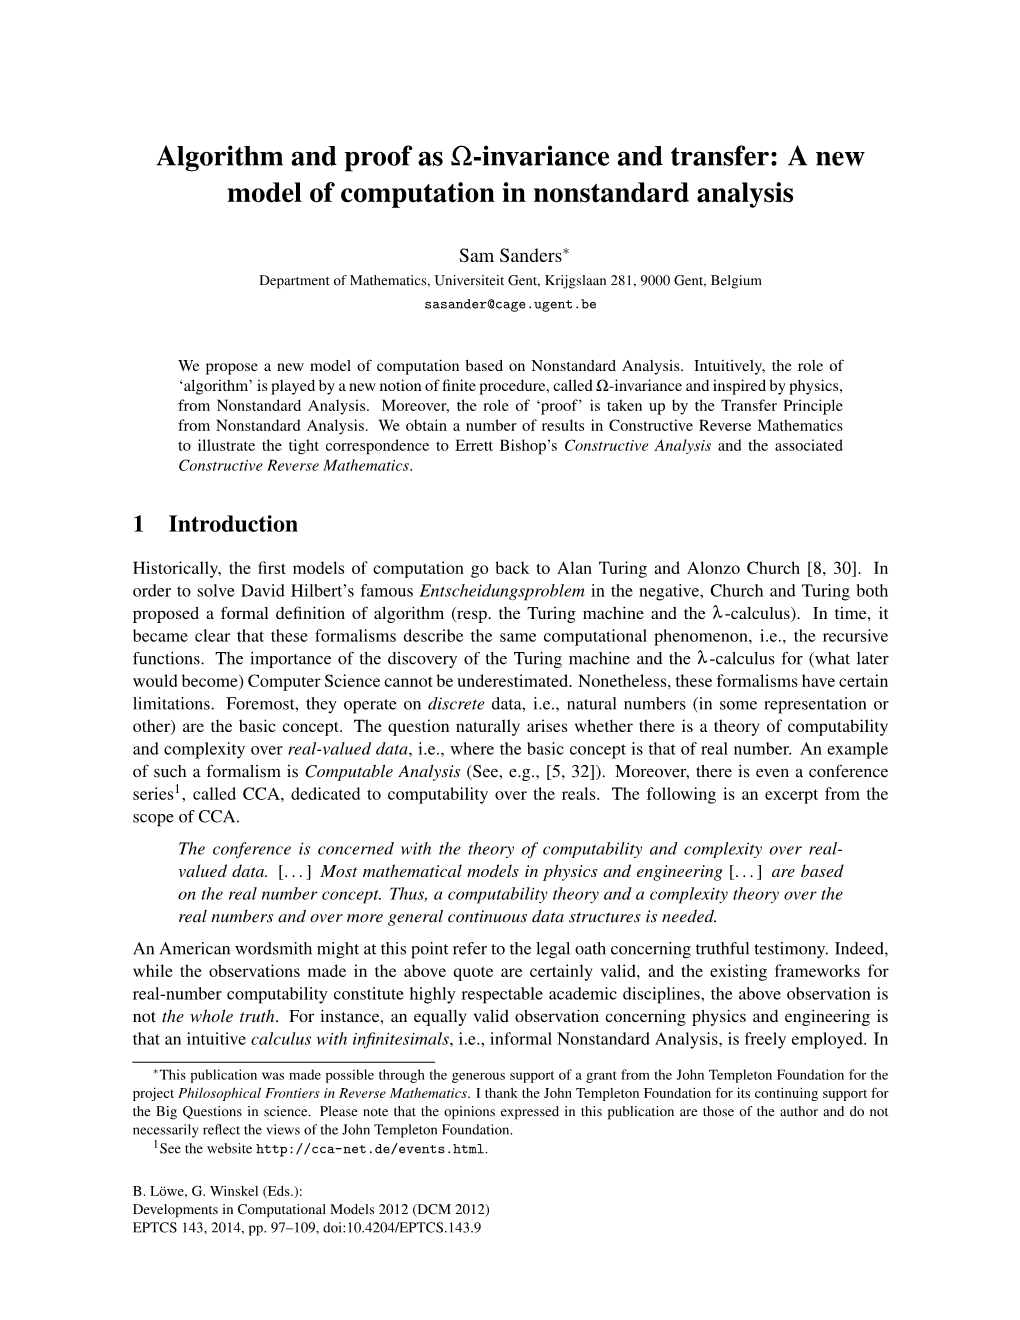 A New Model of Computation in Nonstandard Analysis